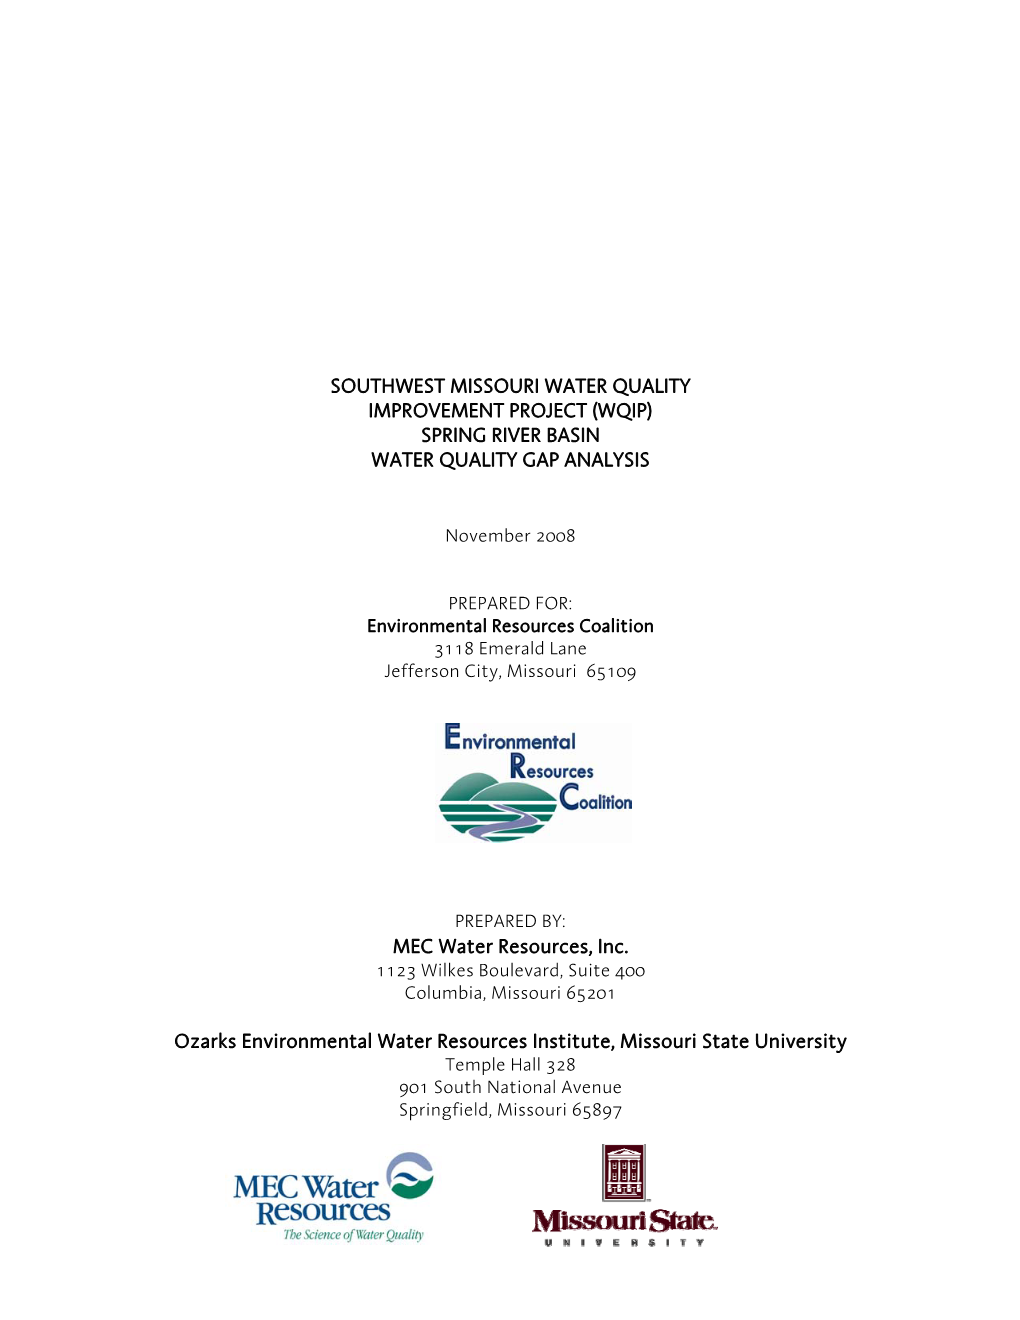 Southwest Missouri Water Quality Improvement Project (Wqip) Spring River Basin Water Quality Gap Analysis